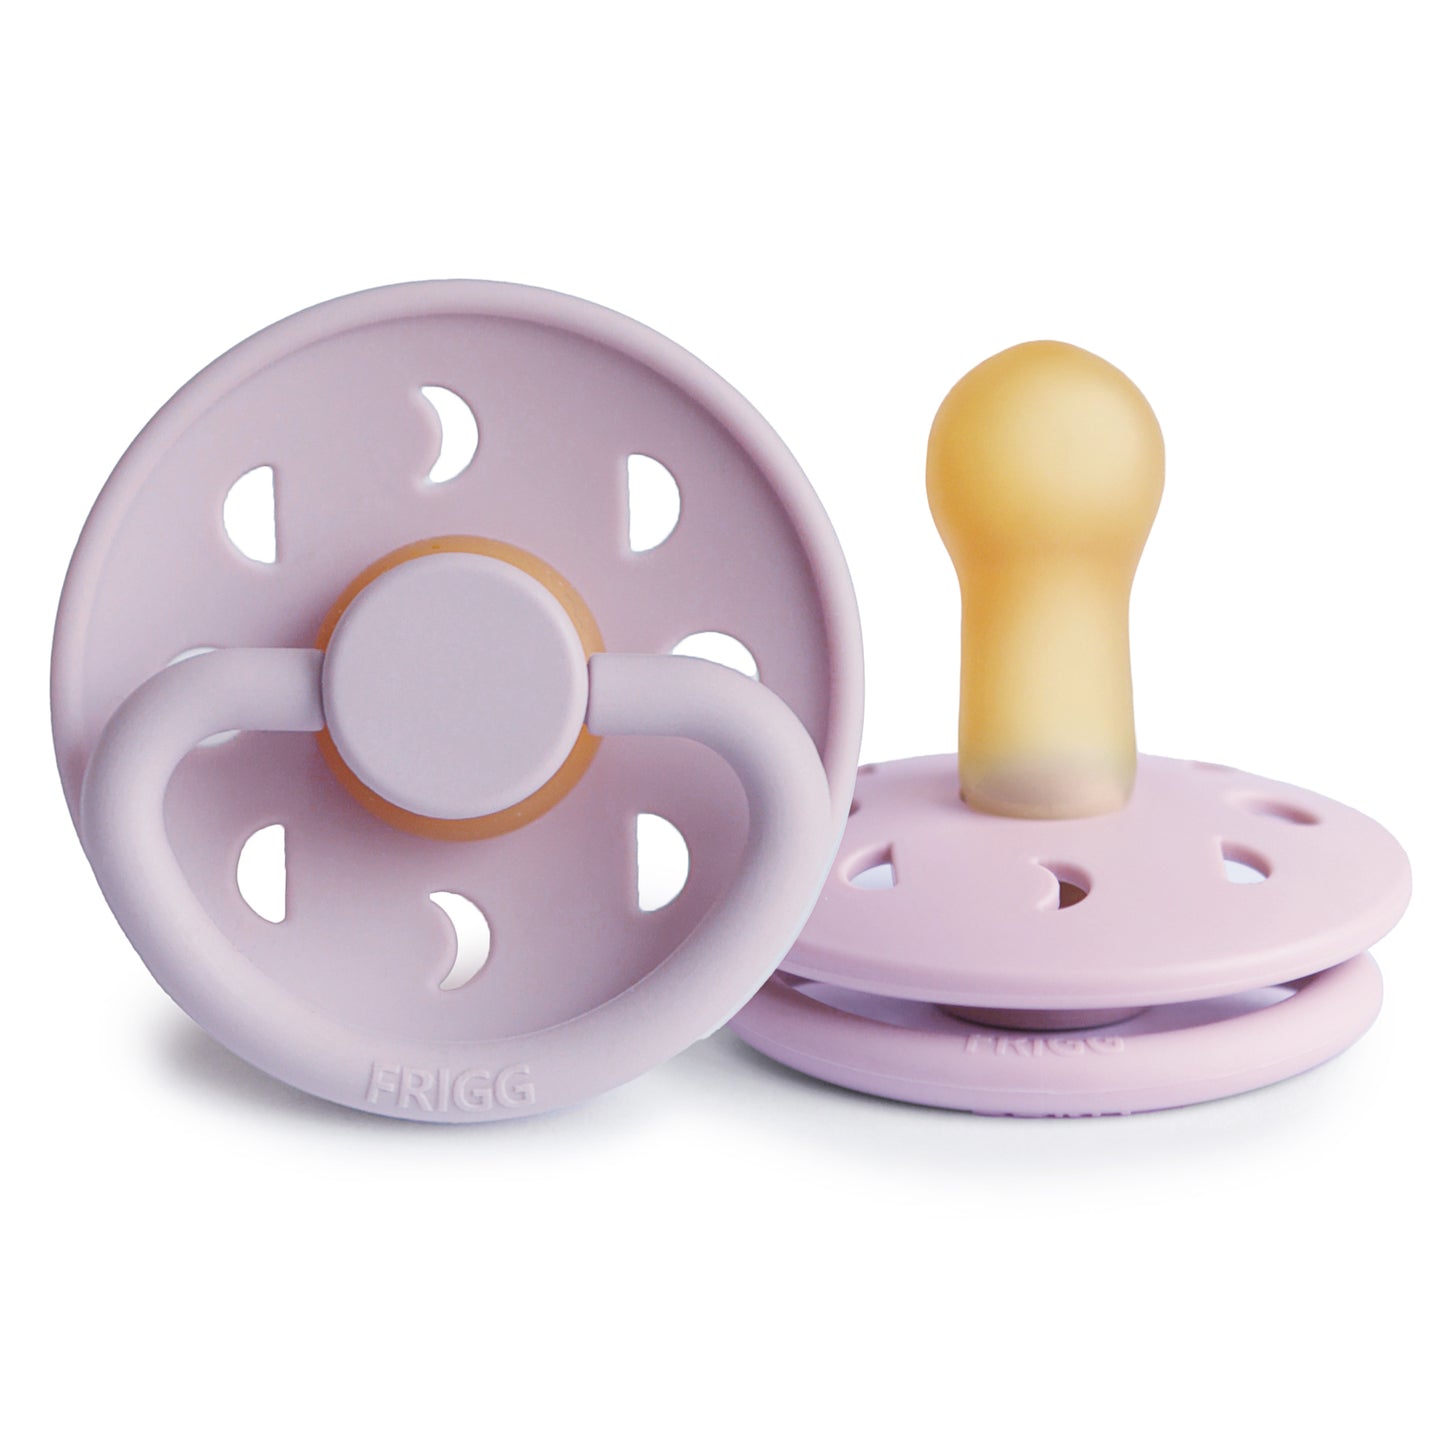 FRIGG Moon Phase Latex Baby Pacifier (1 Piece)